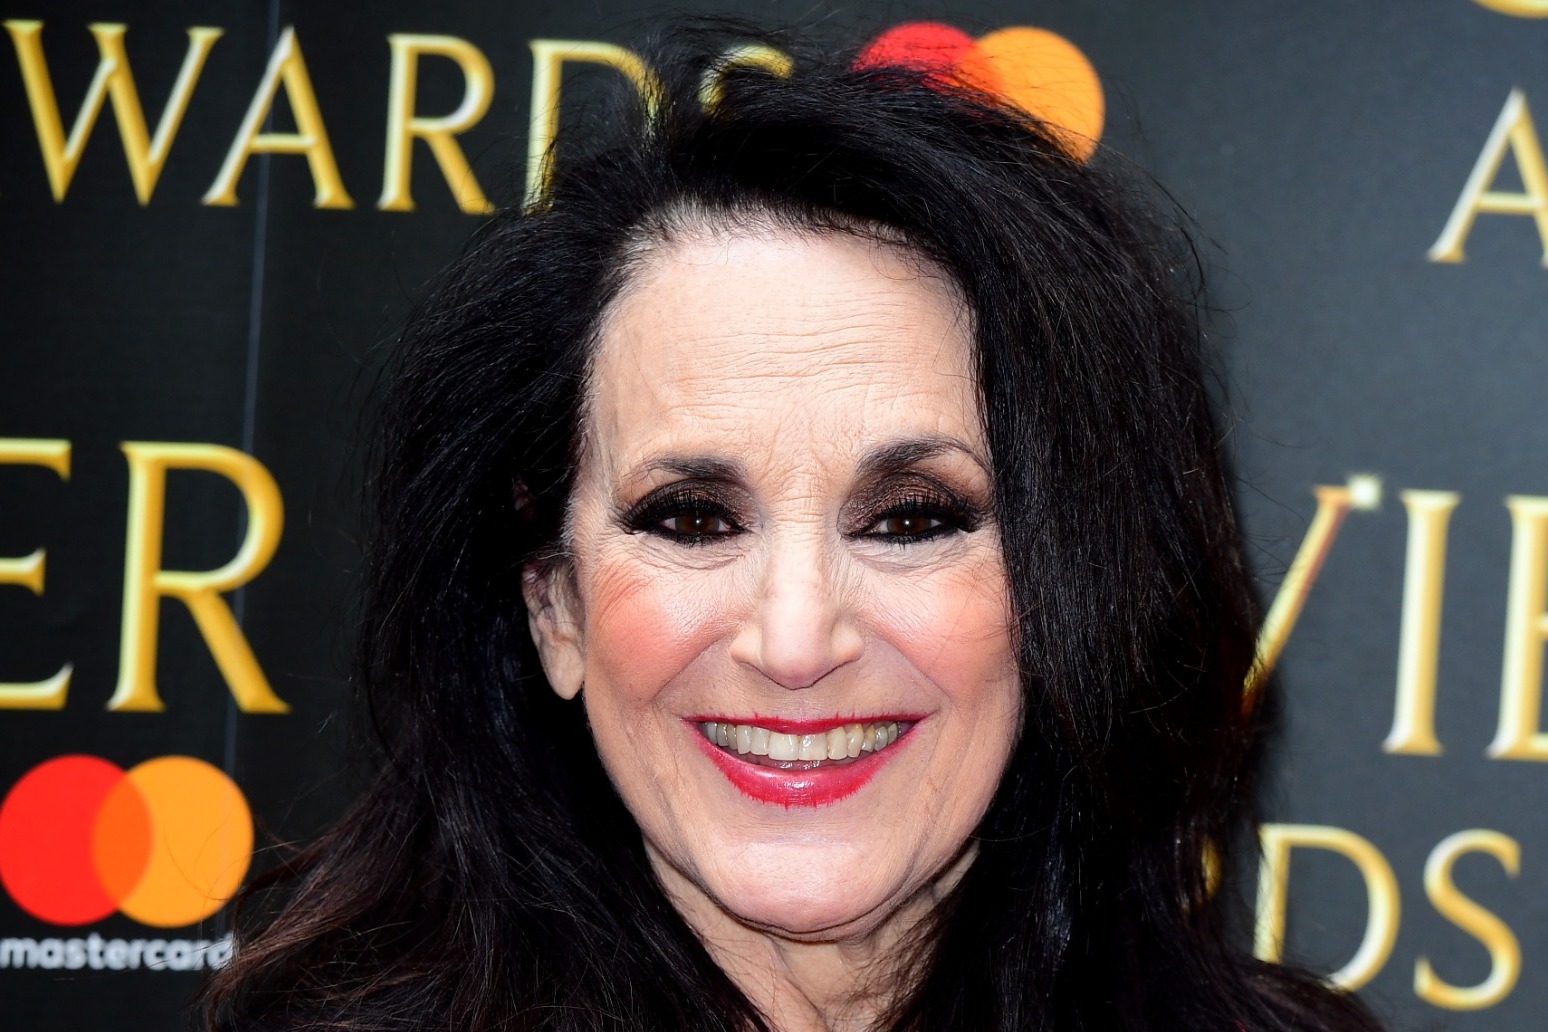 Actress Lesley Joseph reveals she has no plans to retire any time soon 